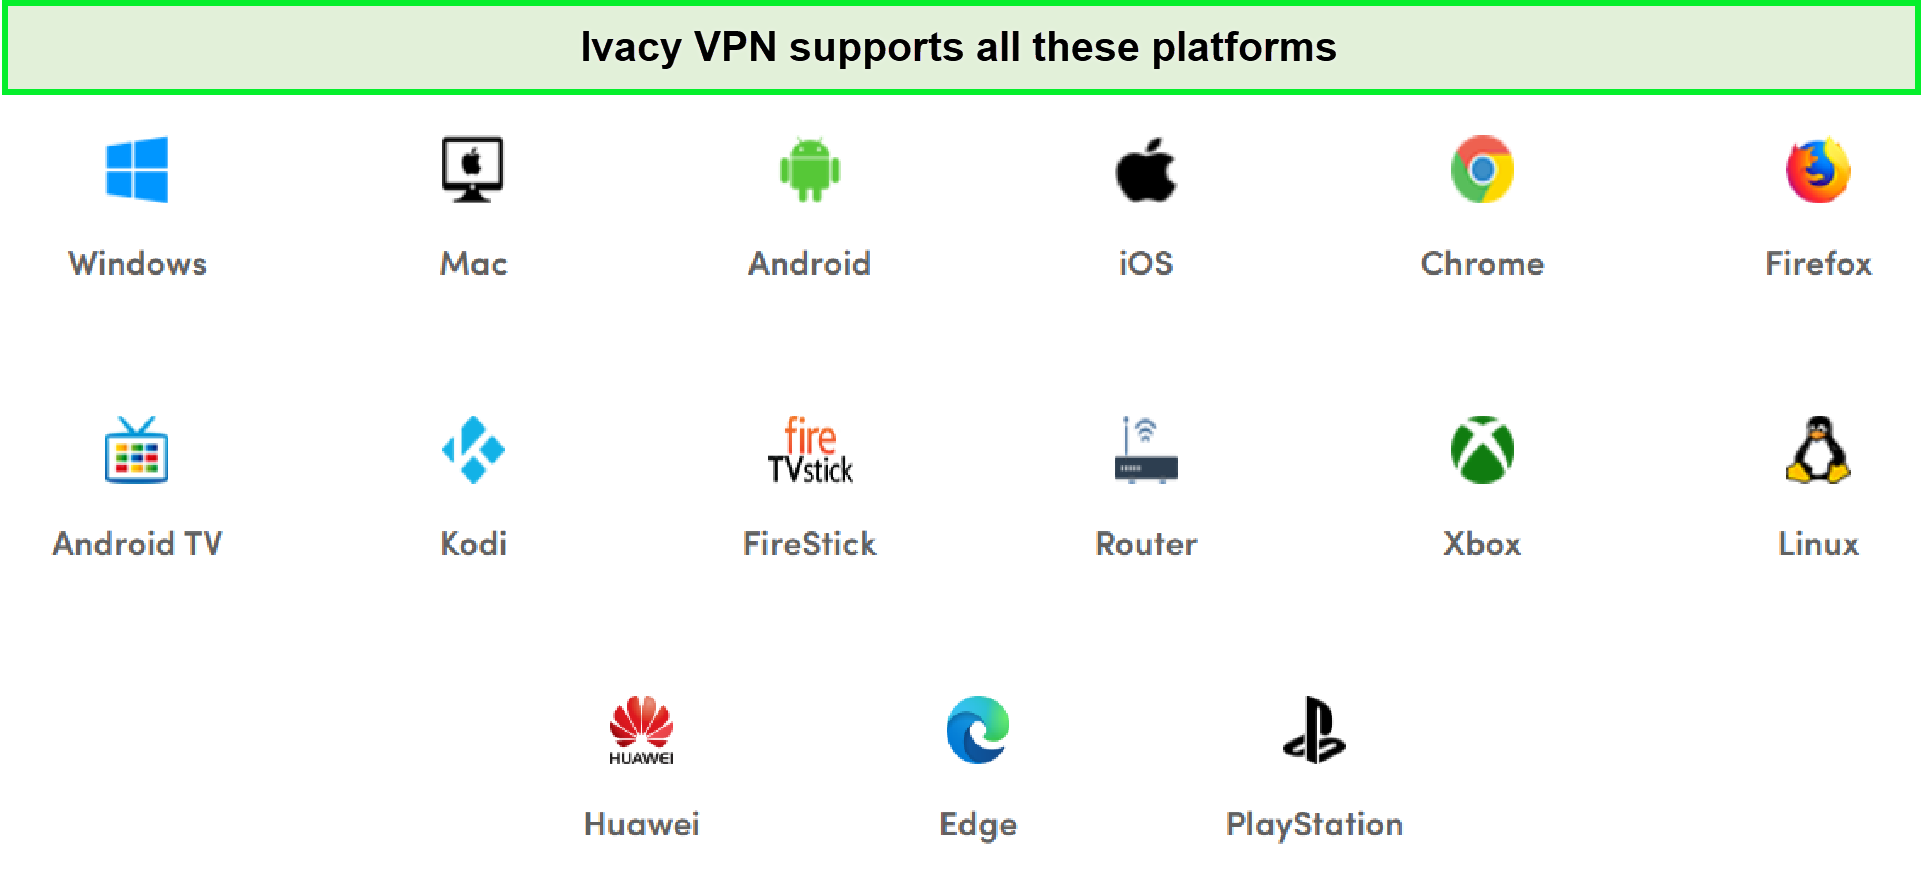 ivacy-device-compatibility-in-UAE